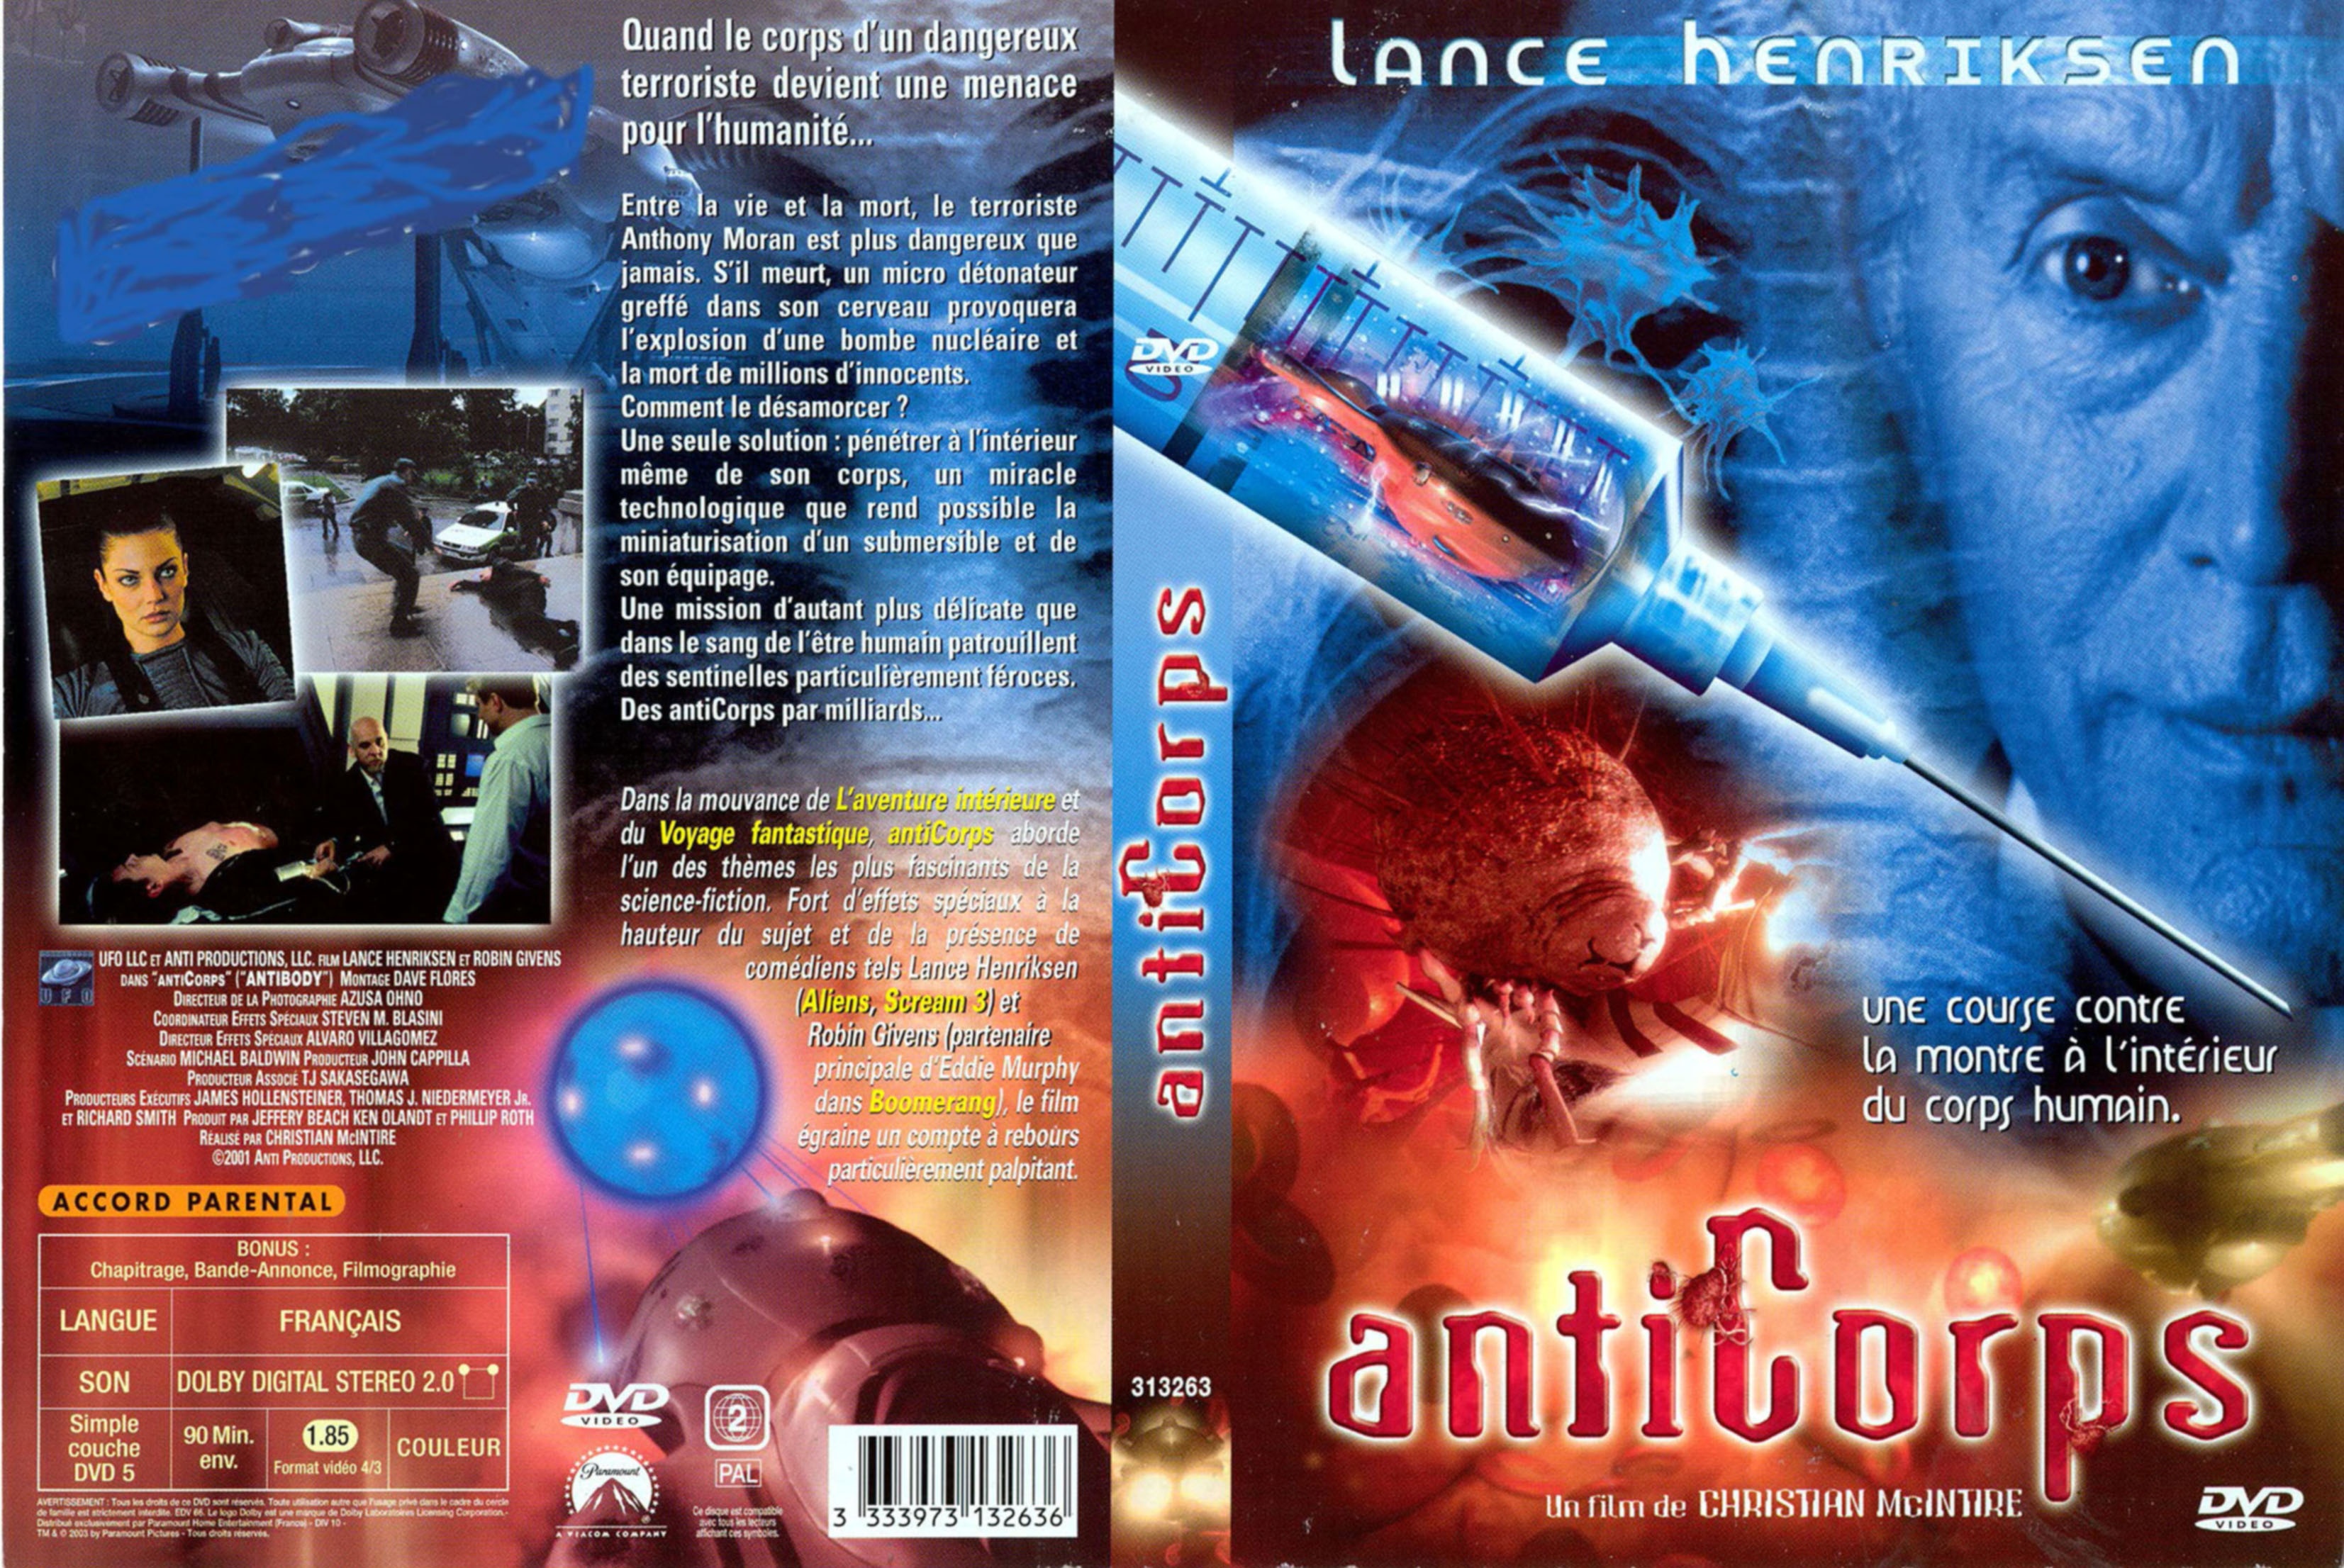 Jaquette DVD Anticorps